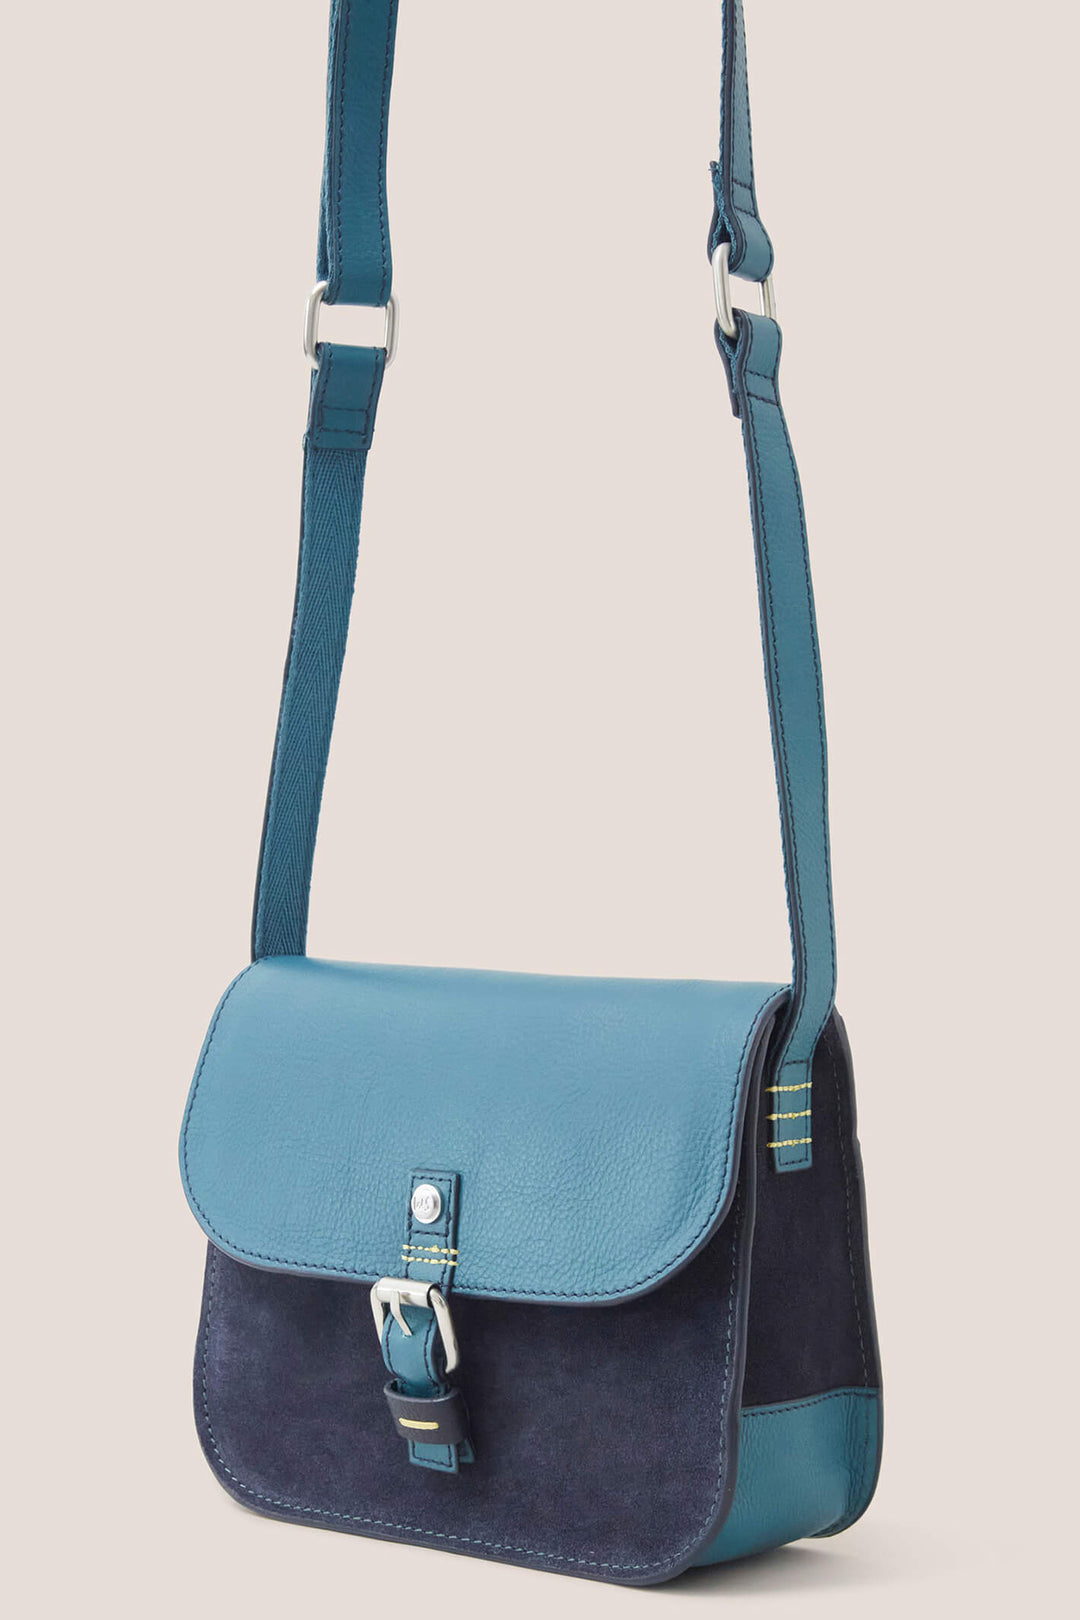 White Stuff 439448 Teal Eve Buckle Leather Satchel Bag - Shirley Allum Boutique